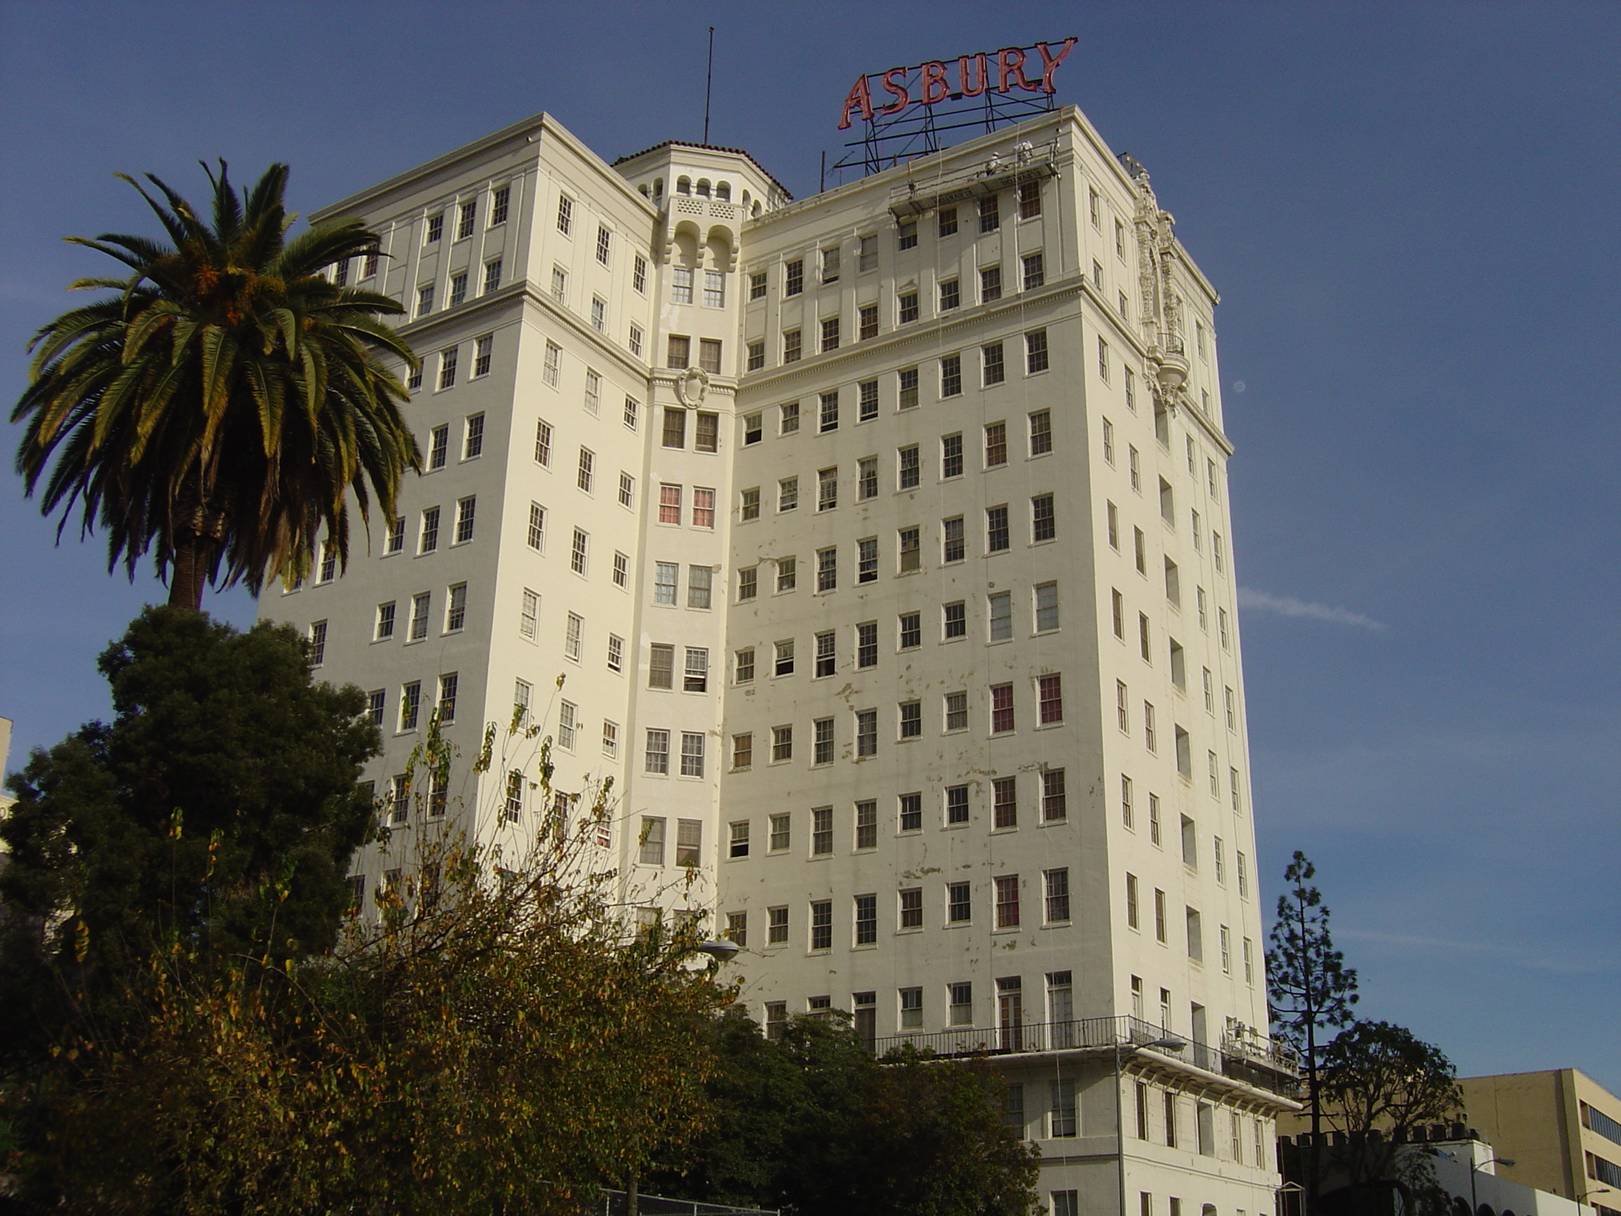 Large twelve story old fashioned building. Building color is of a light brown shade. Rooftop contains a large red sign that reads "Asbury".